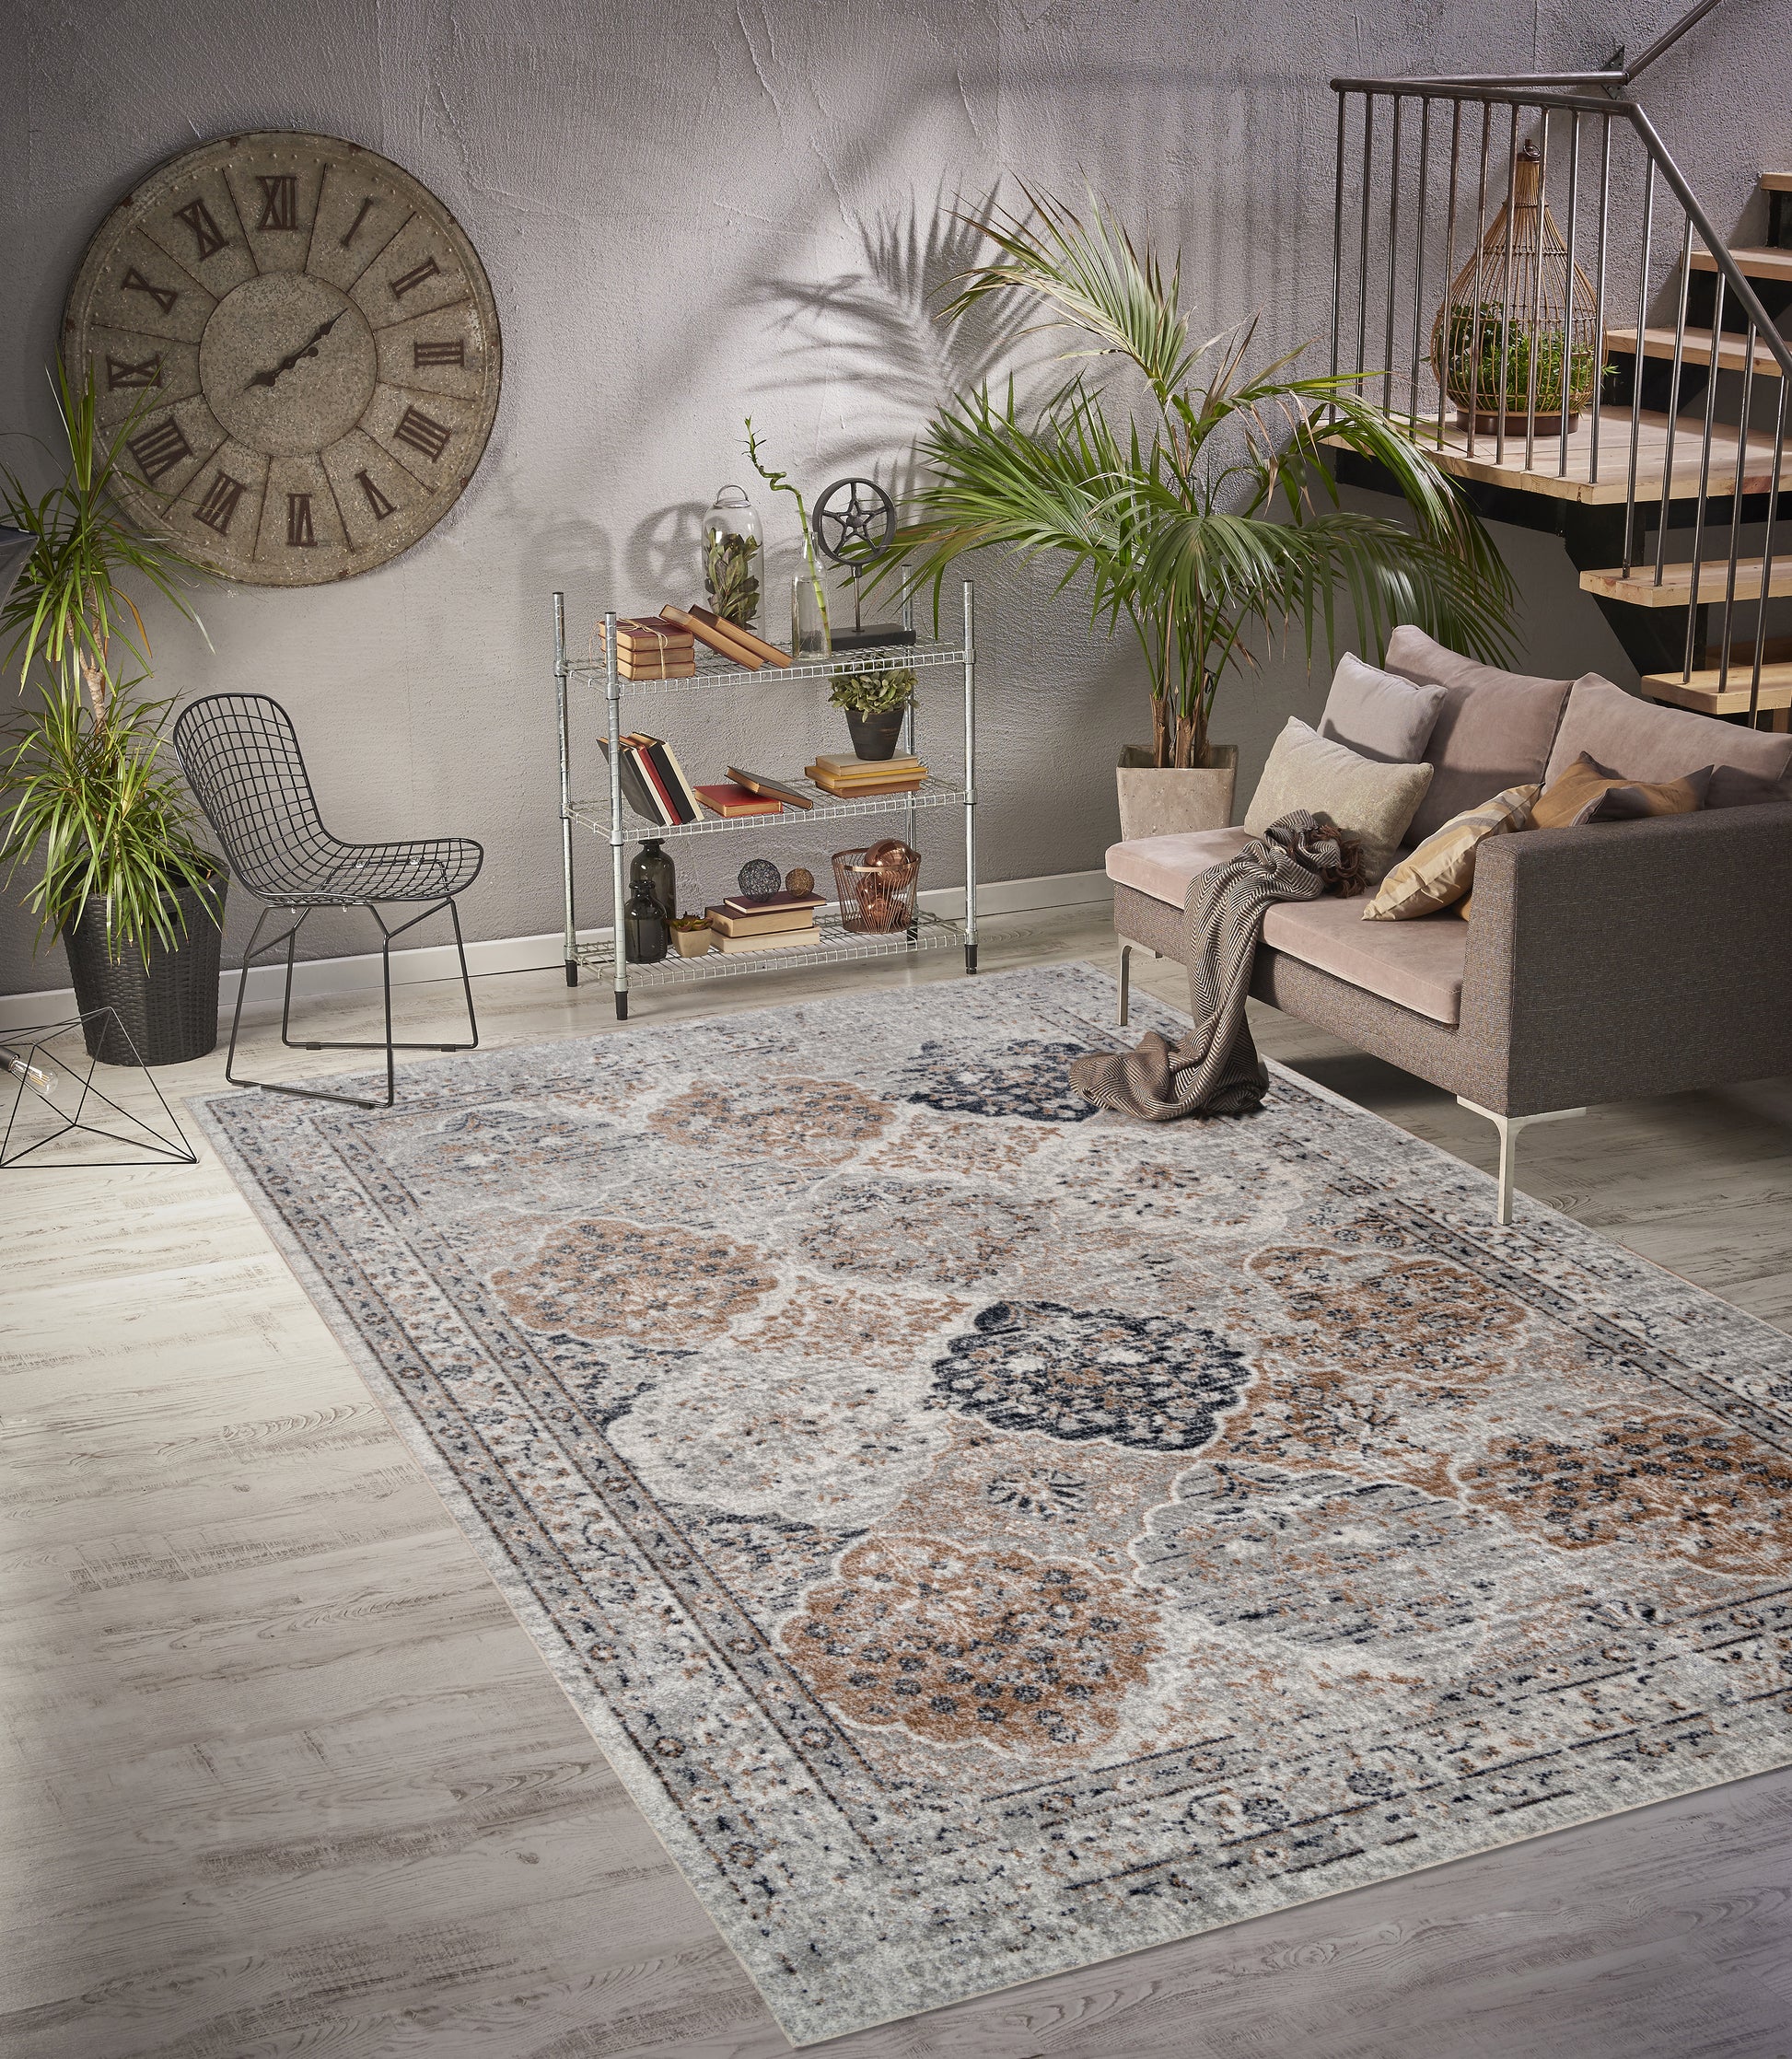 blue ivory brown machine washable boho traditional area rug for living room bedroom 6x8, 6x9 ft Living Room, Bedroom, Dining Area, Kitchen Carpet